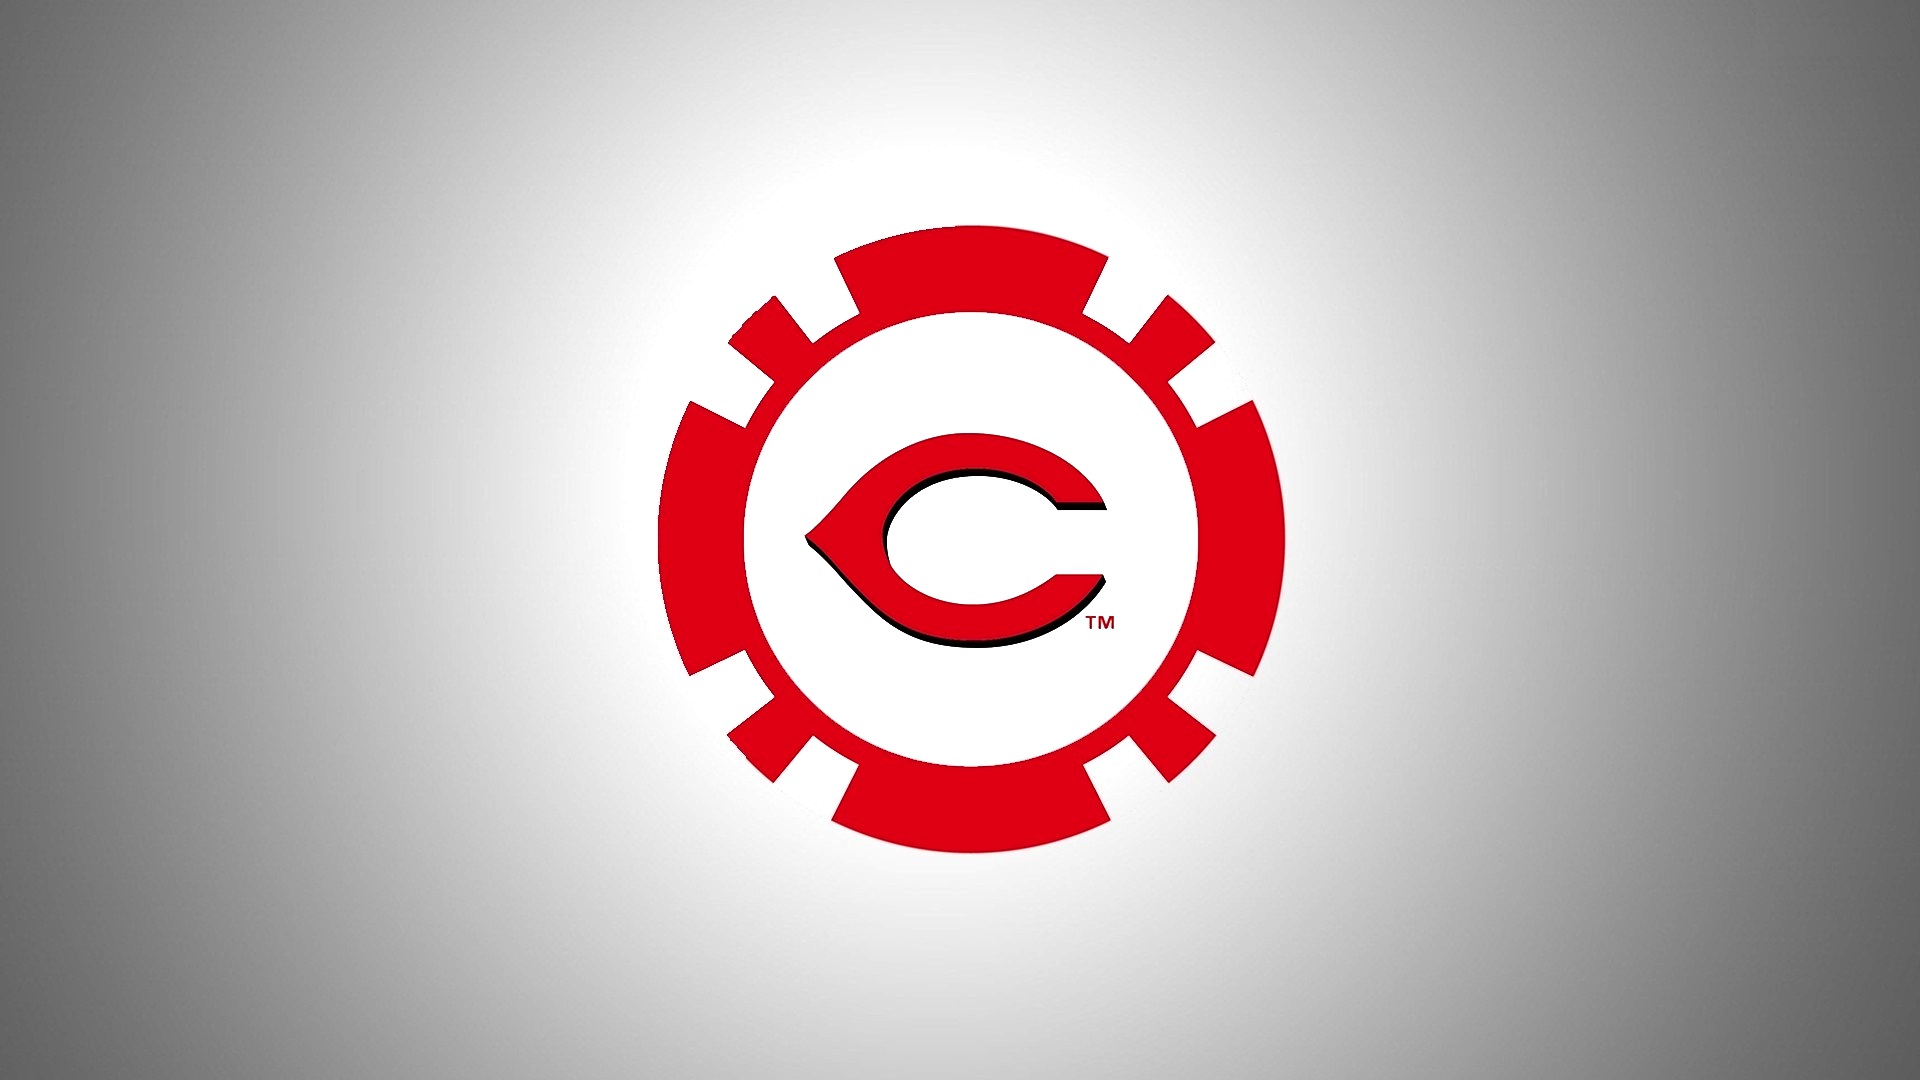 Cincinnati Reds Laptop Wallpaper with high-resolution 1920x1080 pixel. You can use this wallpaper for Mac Desktop Wallpaper, Laptop Screensavers, Android Wallpapers, Tablet or iPhone Home Screen and another mobile phone device